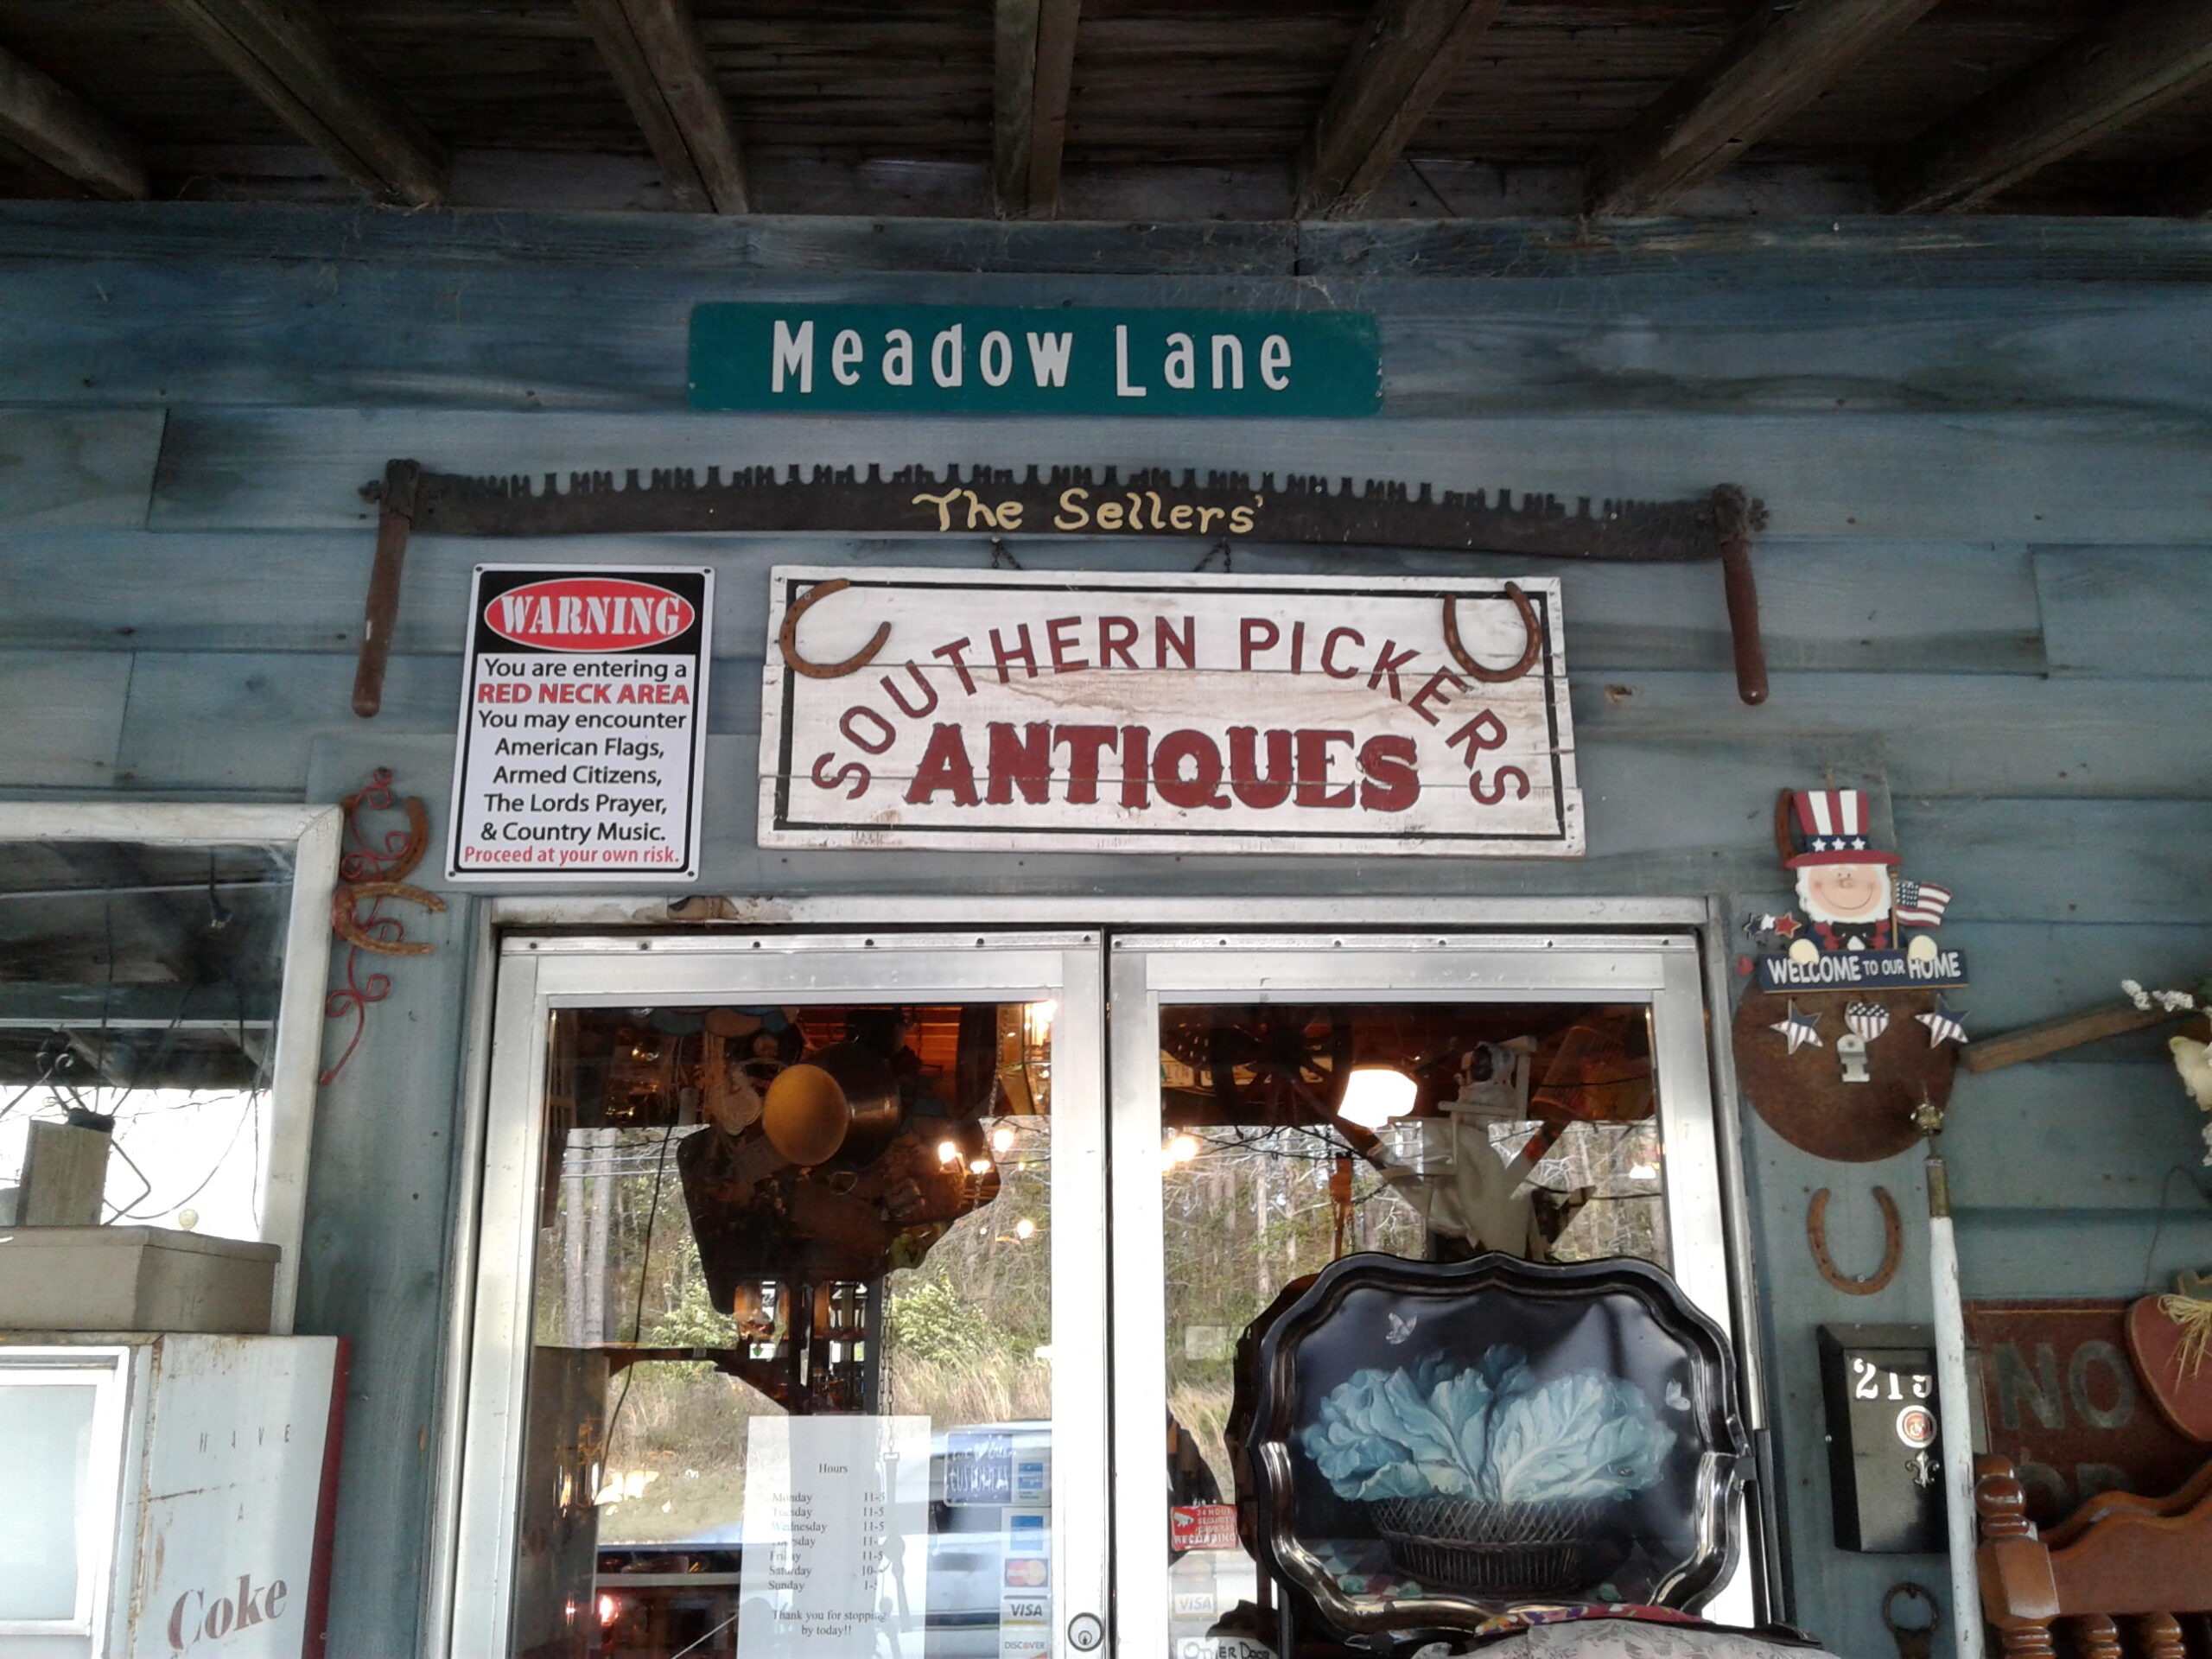 Southern Pickers Antiques